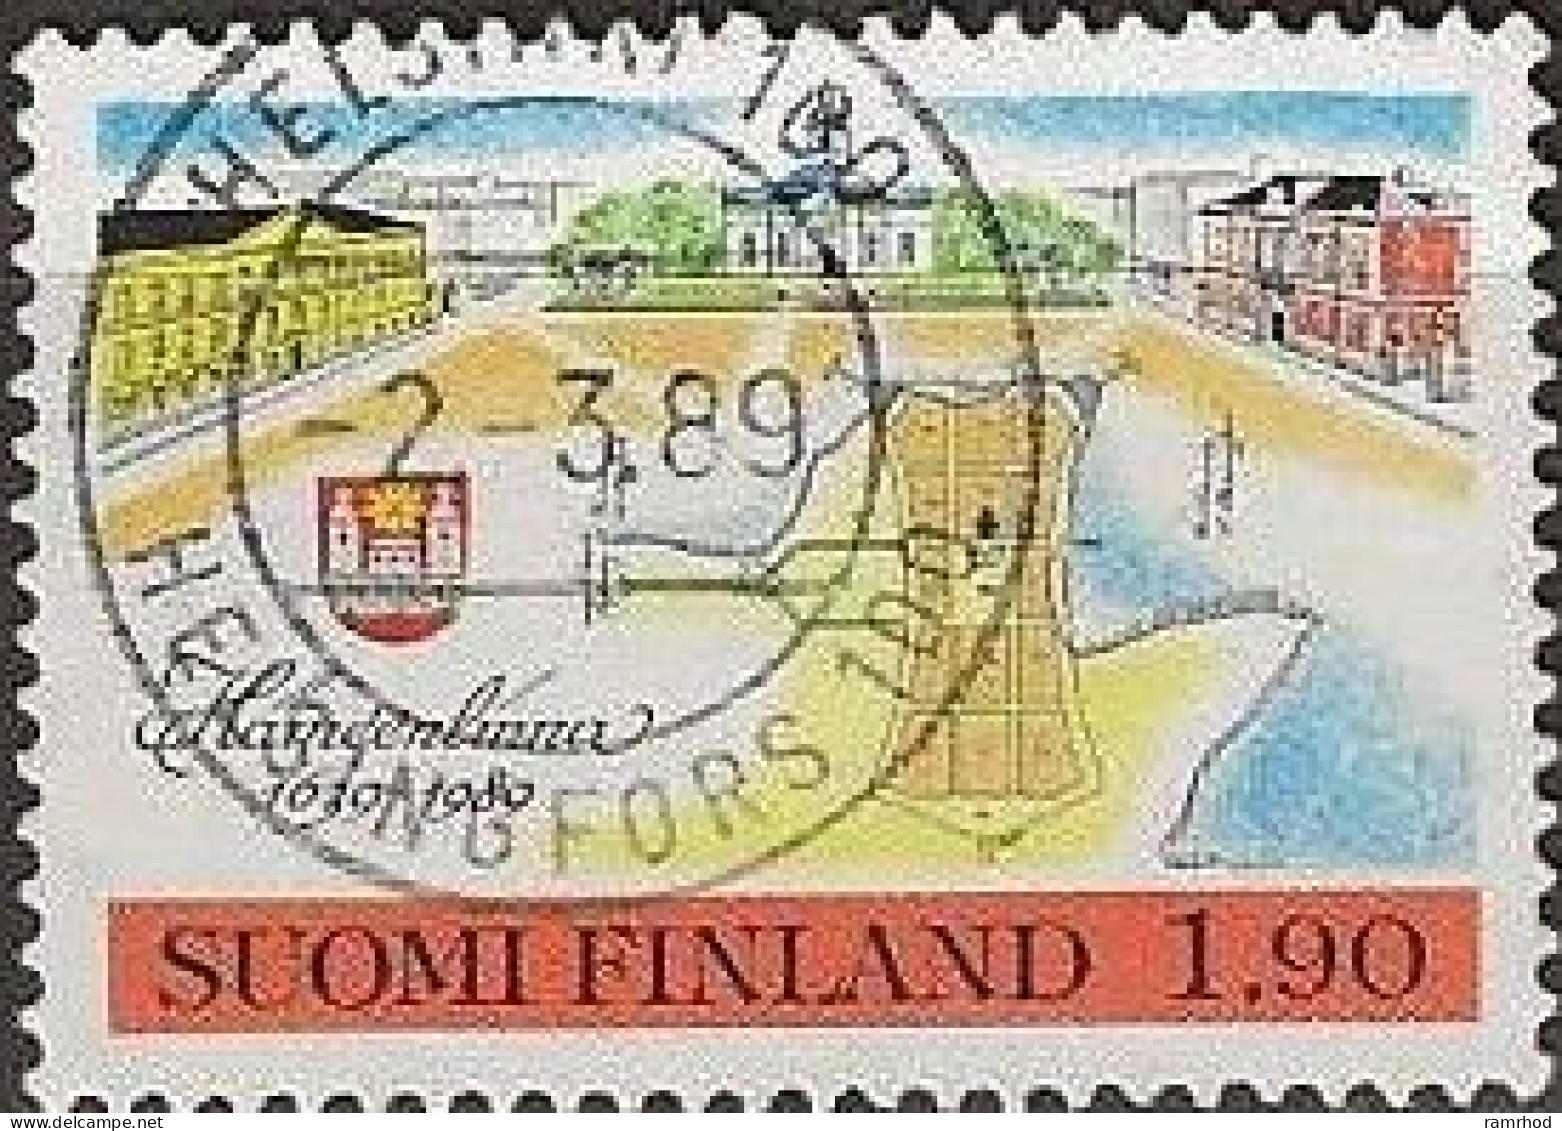 FINLAND 1989 350th Anniv Of Hameenlinna Town Charter - 1m90 Market Place, Town Plan And Arms  FU - Usati